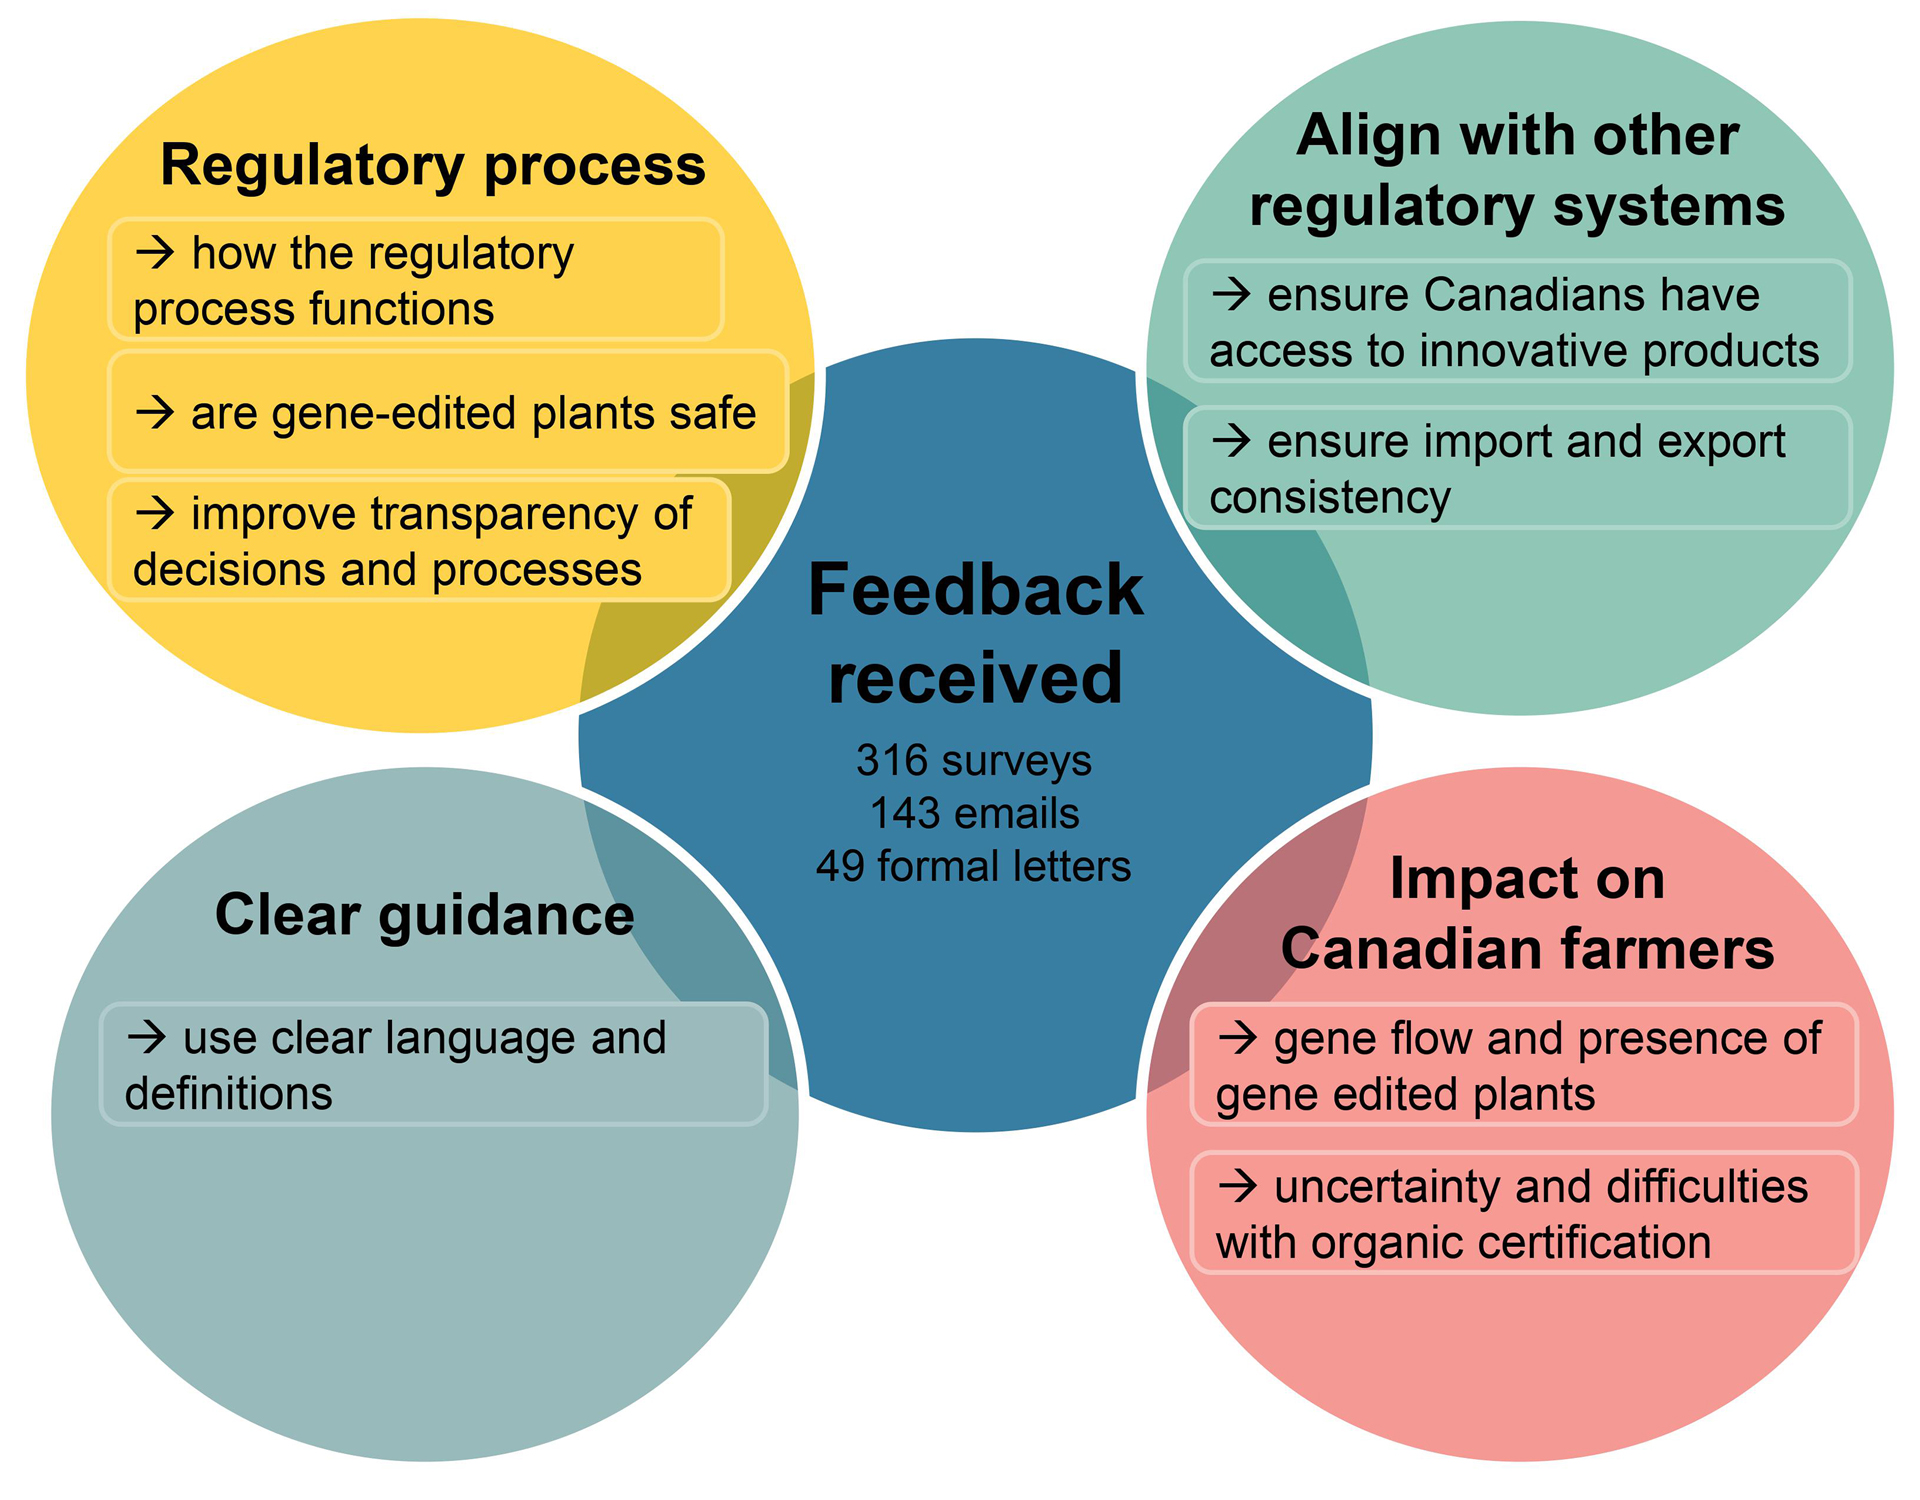 Figure 1 - Diagram of key feedback themes and the related common comments or concerns. Description follows.